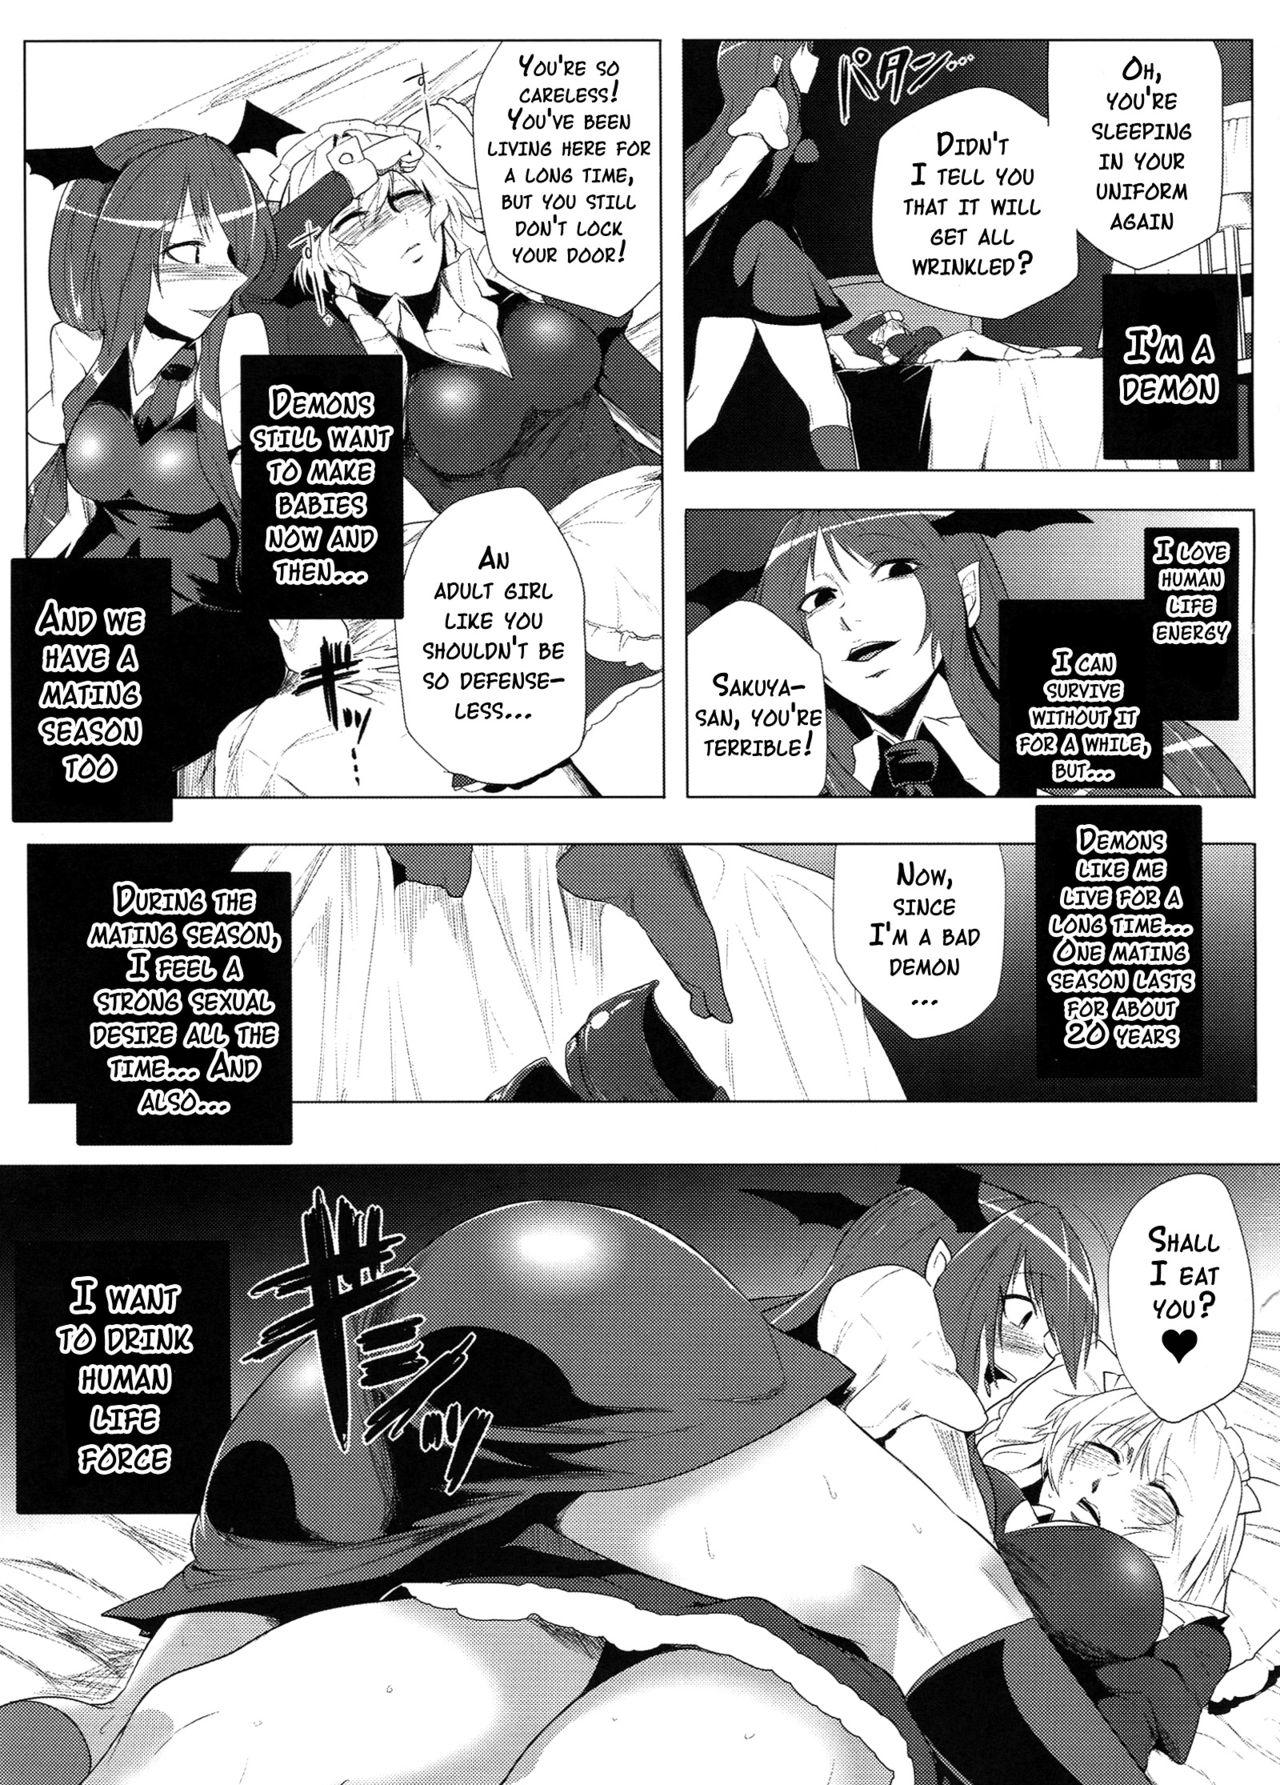 Black THE BEGINNING OF THE END OF ETERNITY - Touhou project Para - Page 8